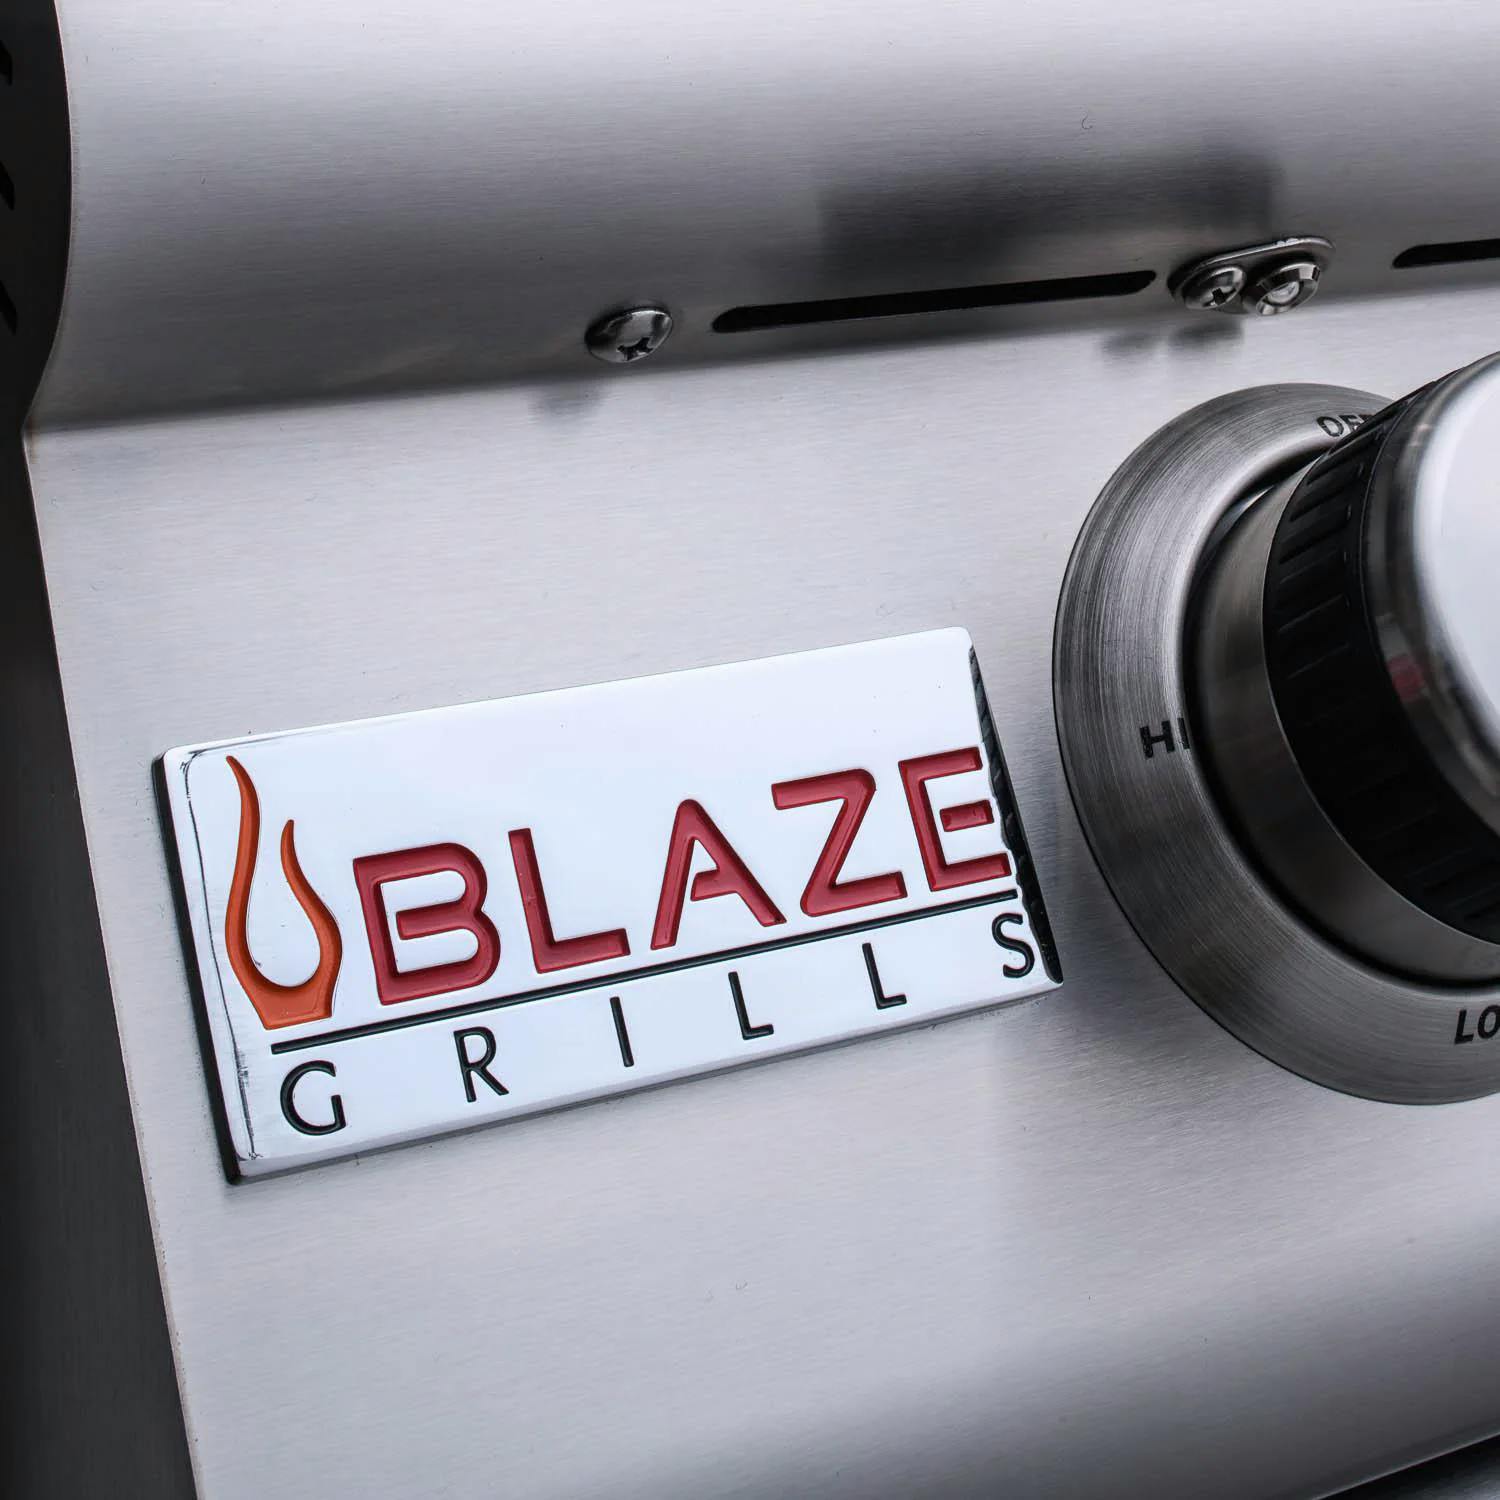 Blaze Premium LTE 5-Burner Built-In Gas Grill with Rear Infrared Burner and Grill Lights · 40 in. · Propane